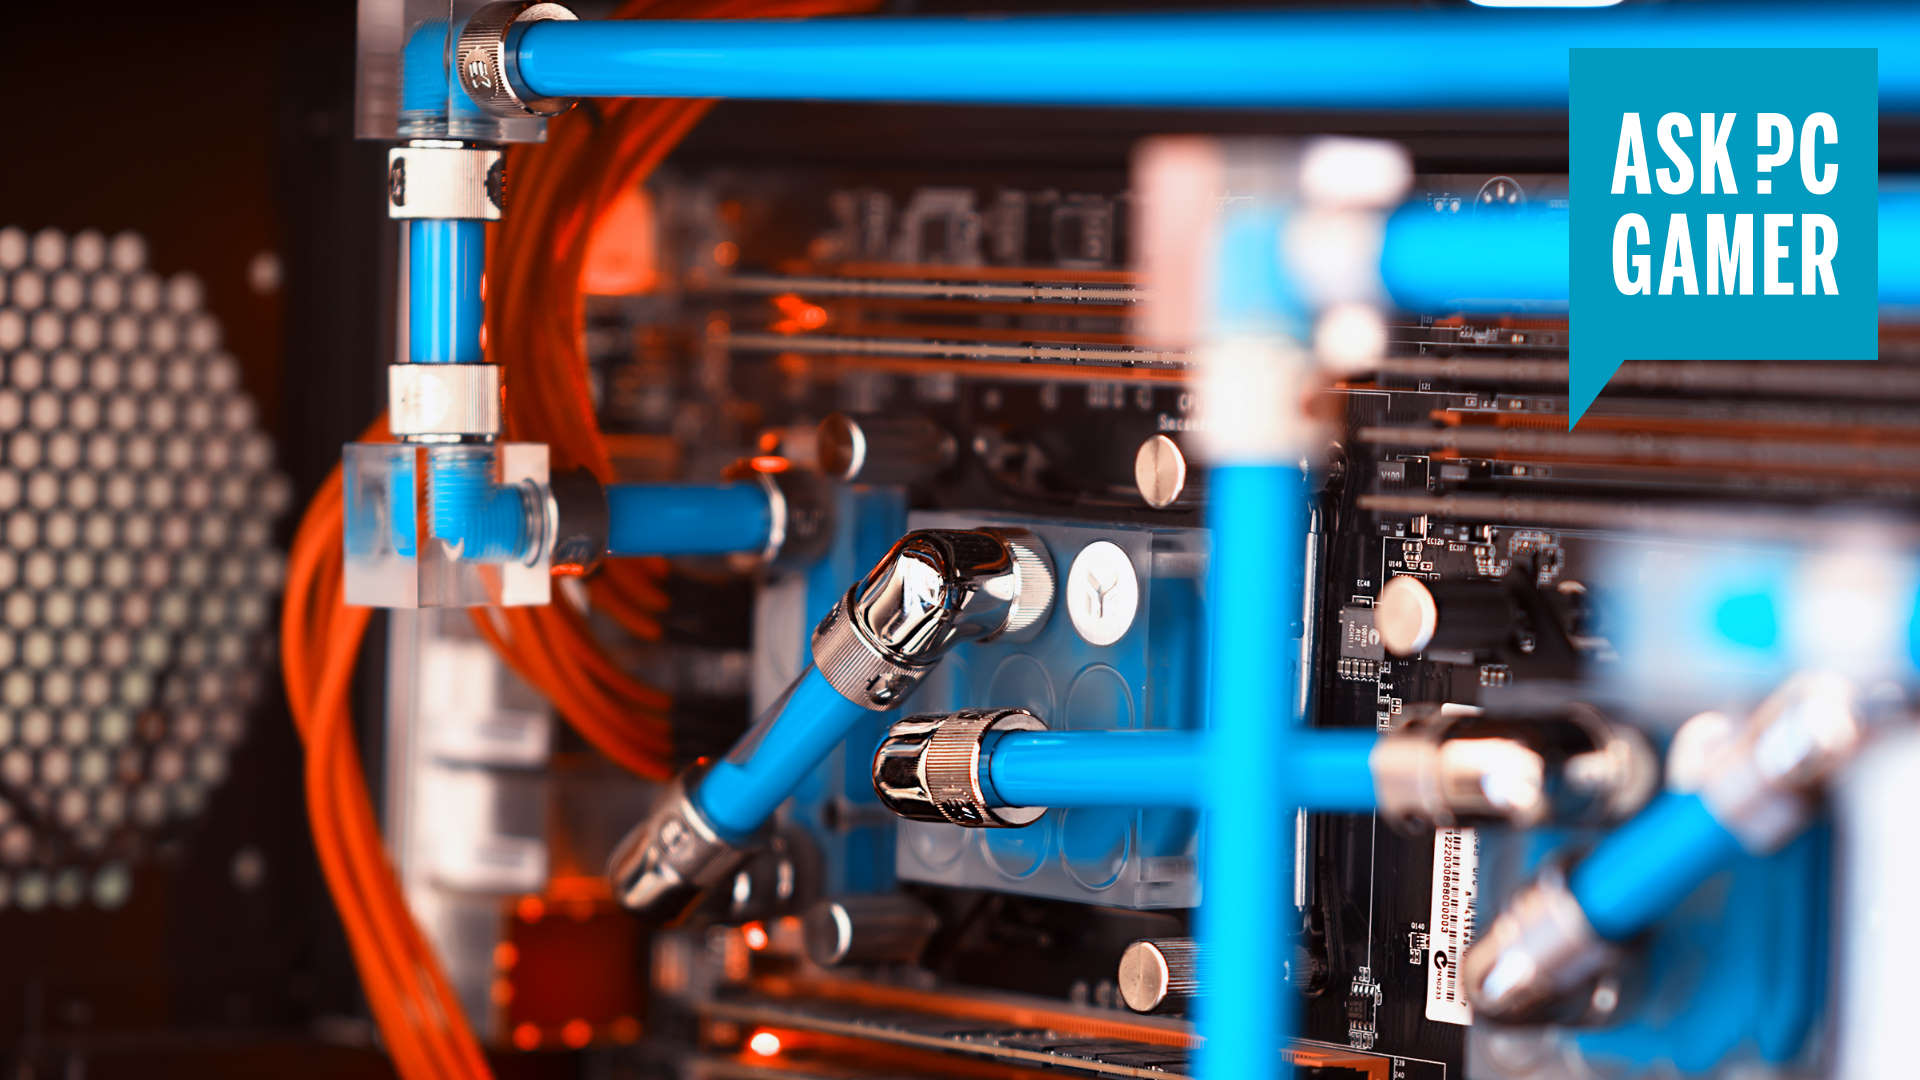 Is liquid cooling safe for PC?